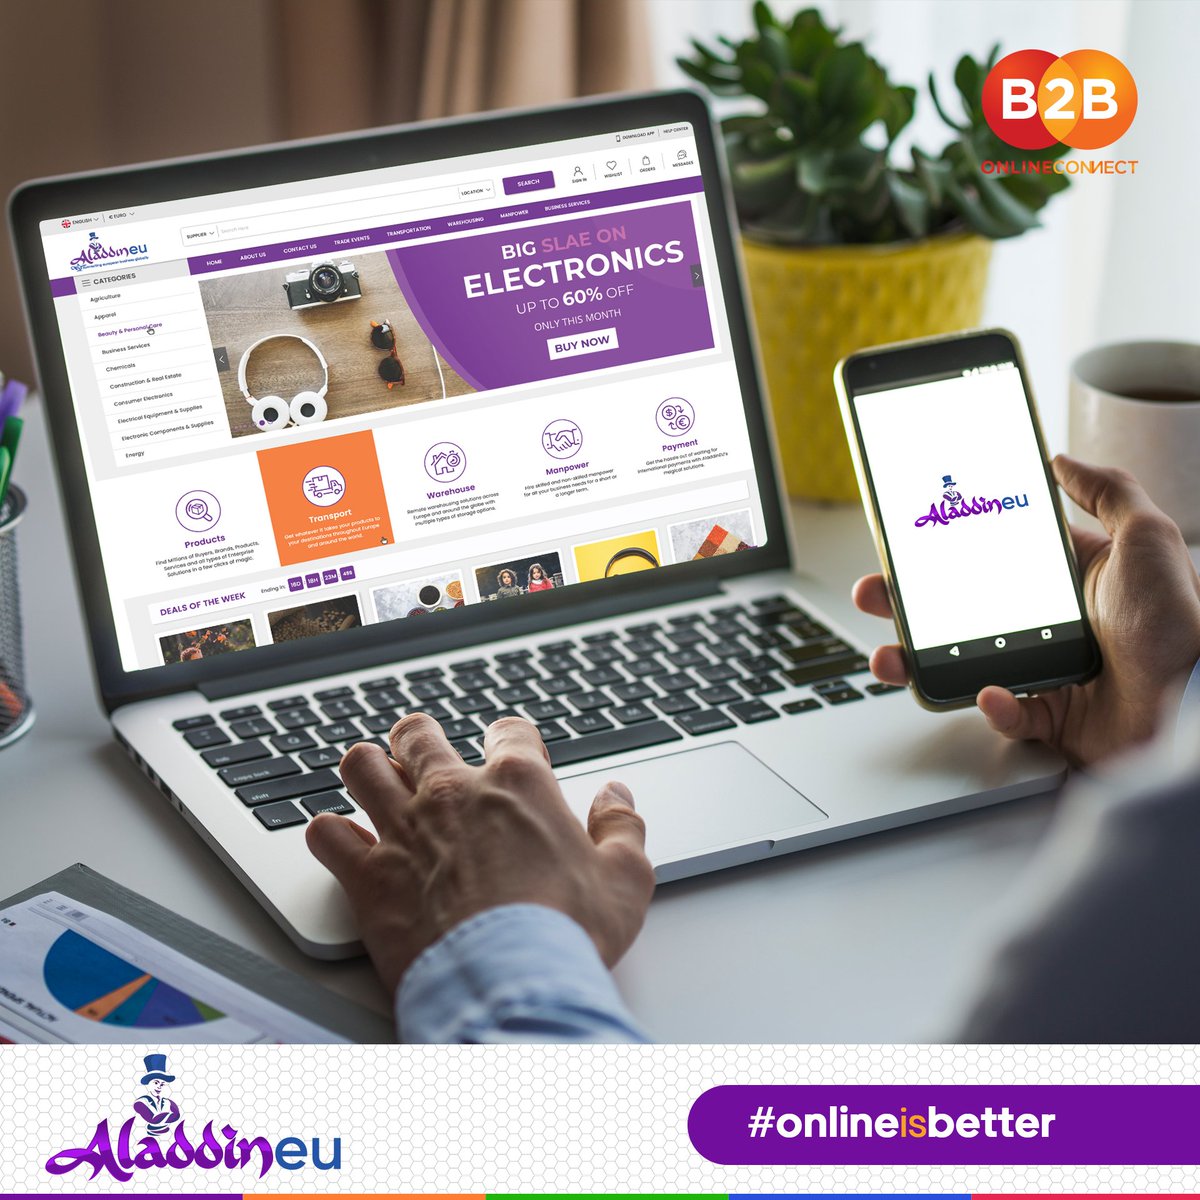 Register at Aladdineu Now and Enjoy Tools Designed to Manage & Expand your Business Online With Ease. 
-
-
👉👉👉aladdineu.com
-
-
#aladdineu #aladdineub2b #purplemagic #b2b #b2bmarketing #b2bplatform #sales #b2bagency #businessexpo #europe #italy #unitedkingdom